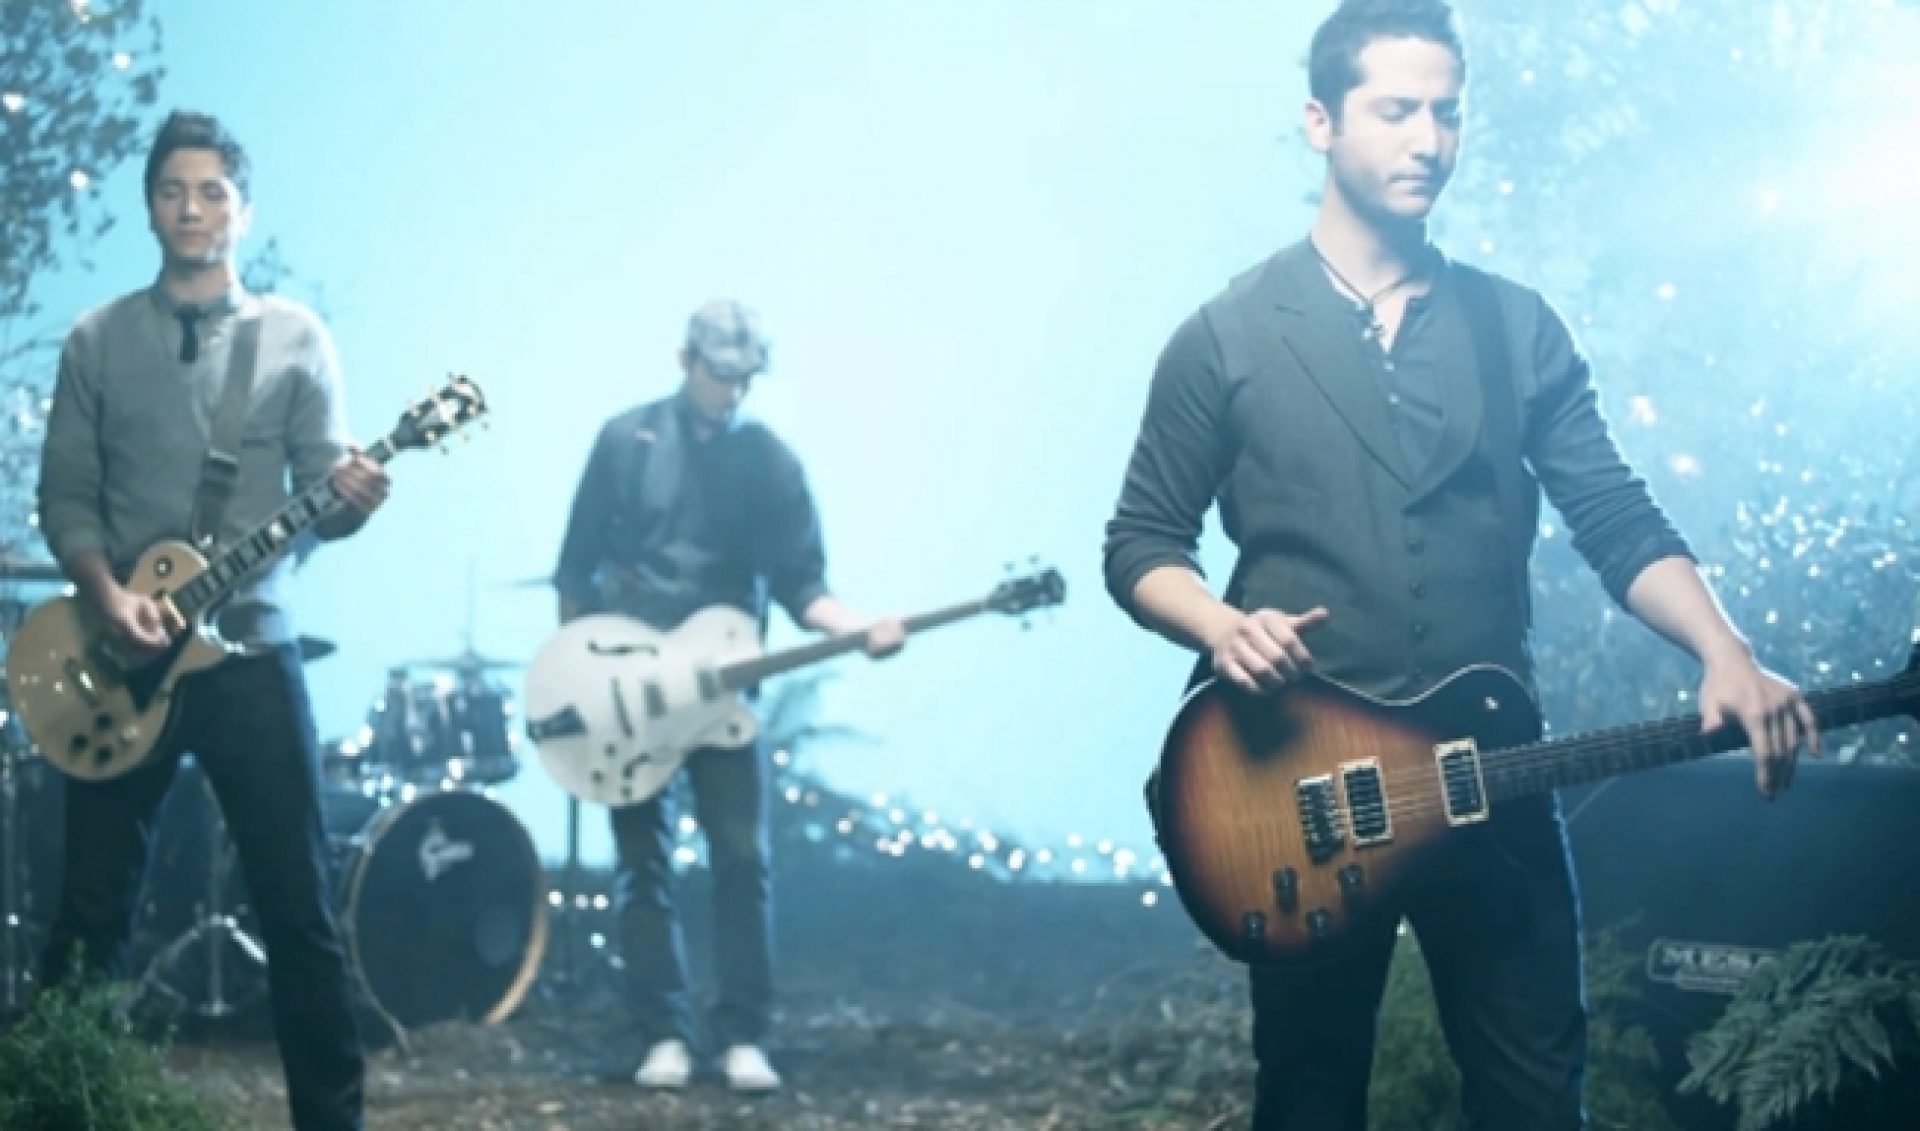 With Catchy Tunes, Boyce Avenue Has The Streamy Awards Covered